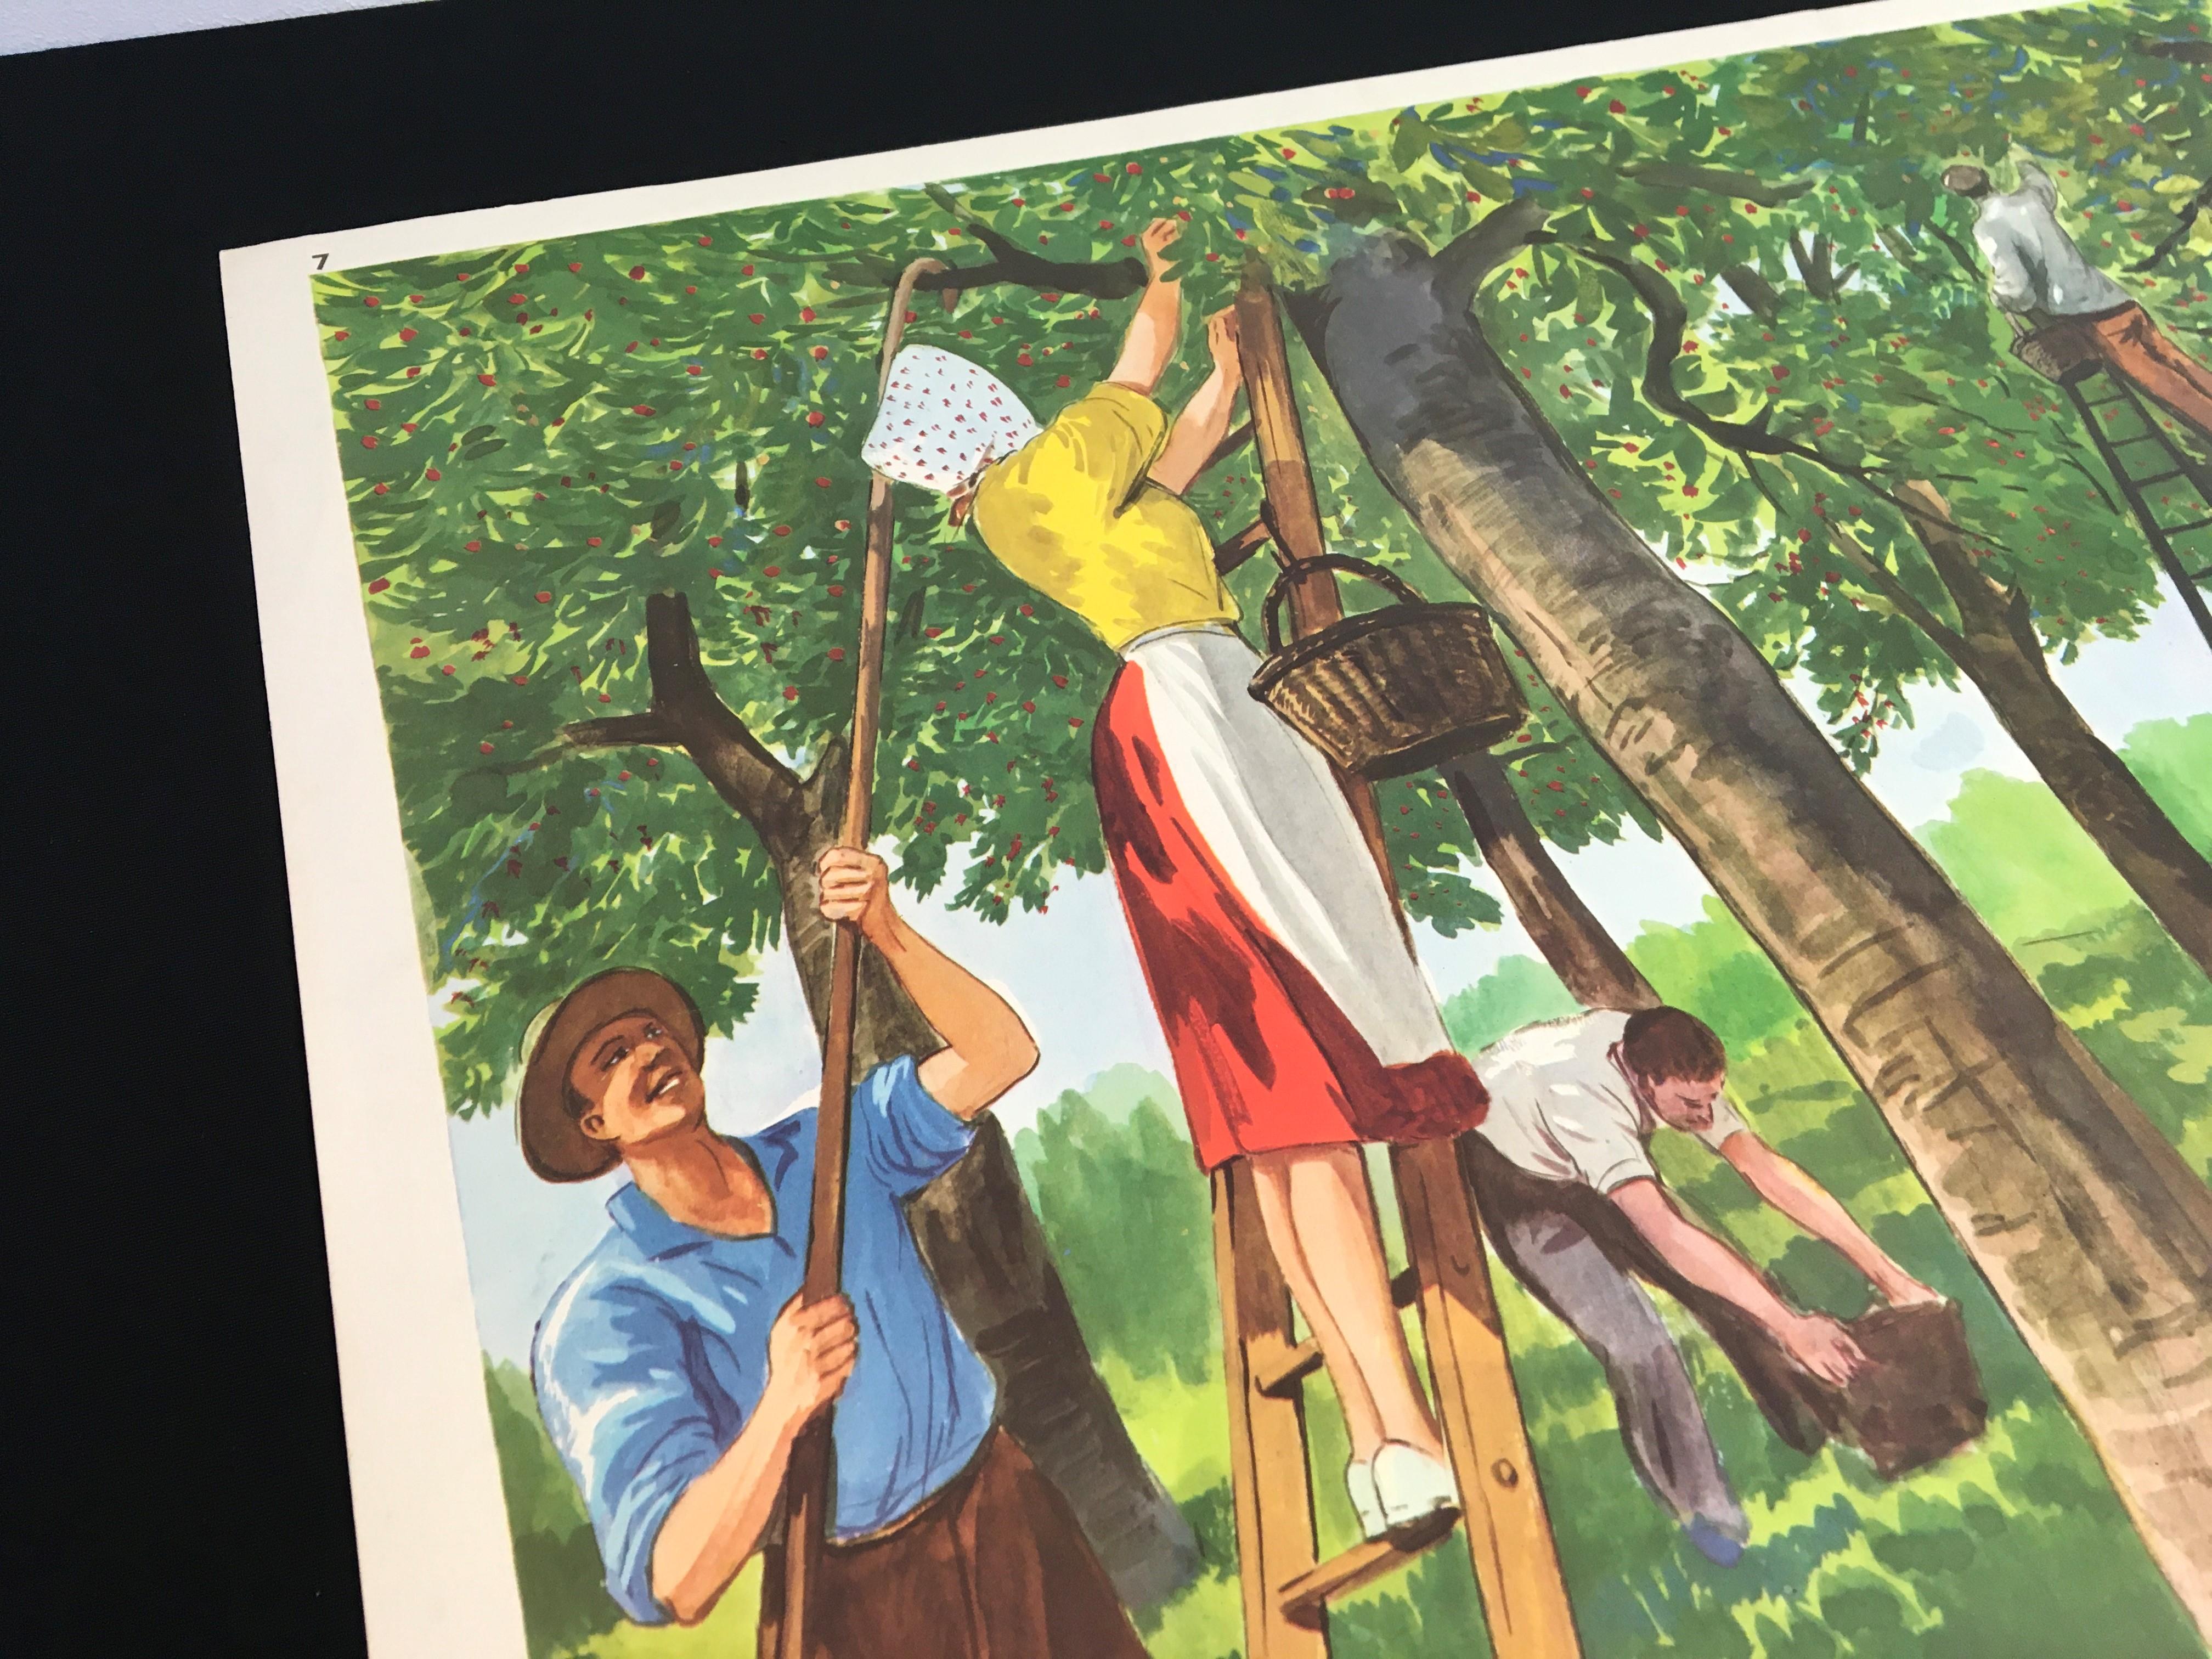 French School Poster Picking Cherries in the Garden by Rossignol